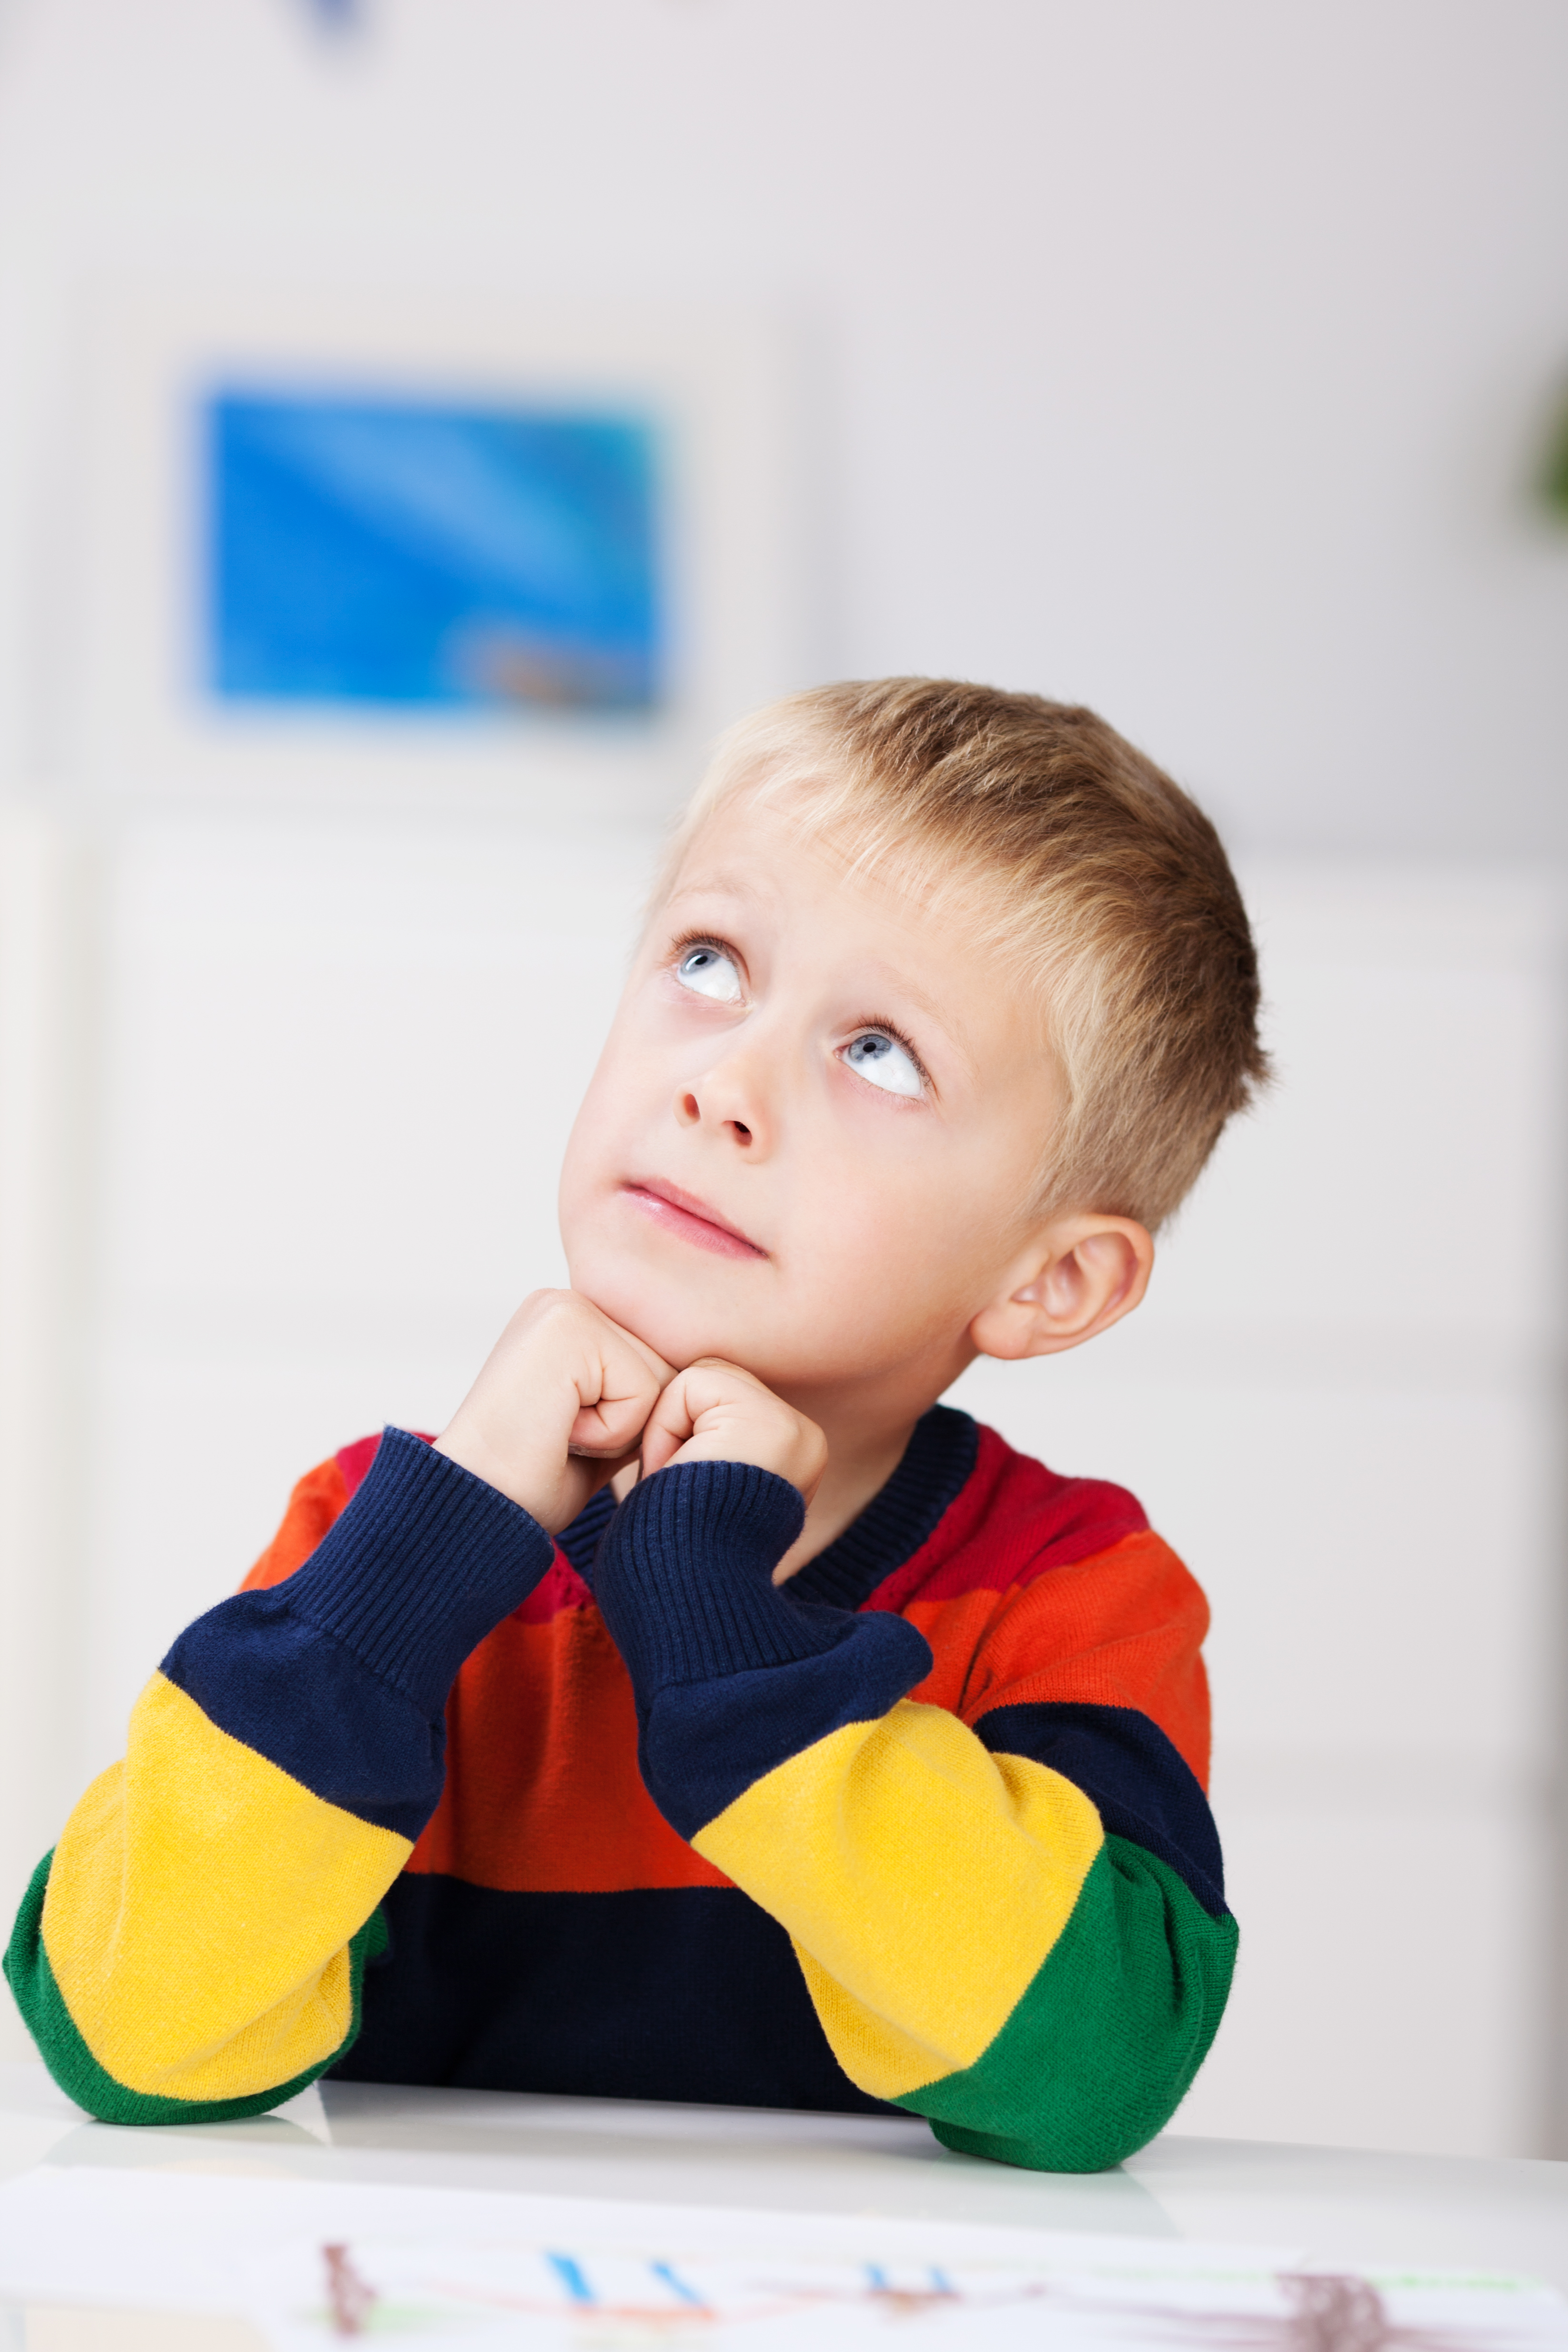 A young boy looking up at the ceiling | Source: Shutterstock